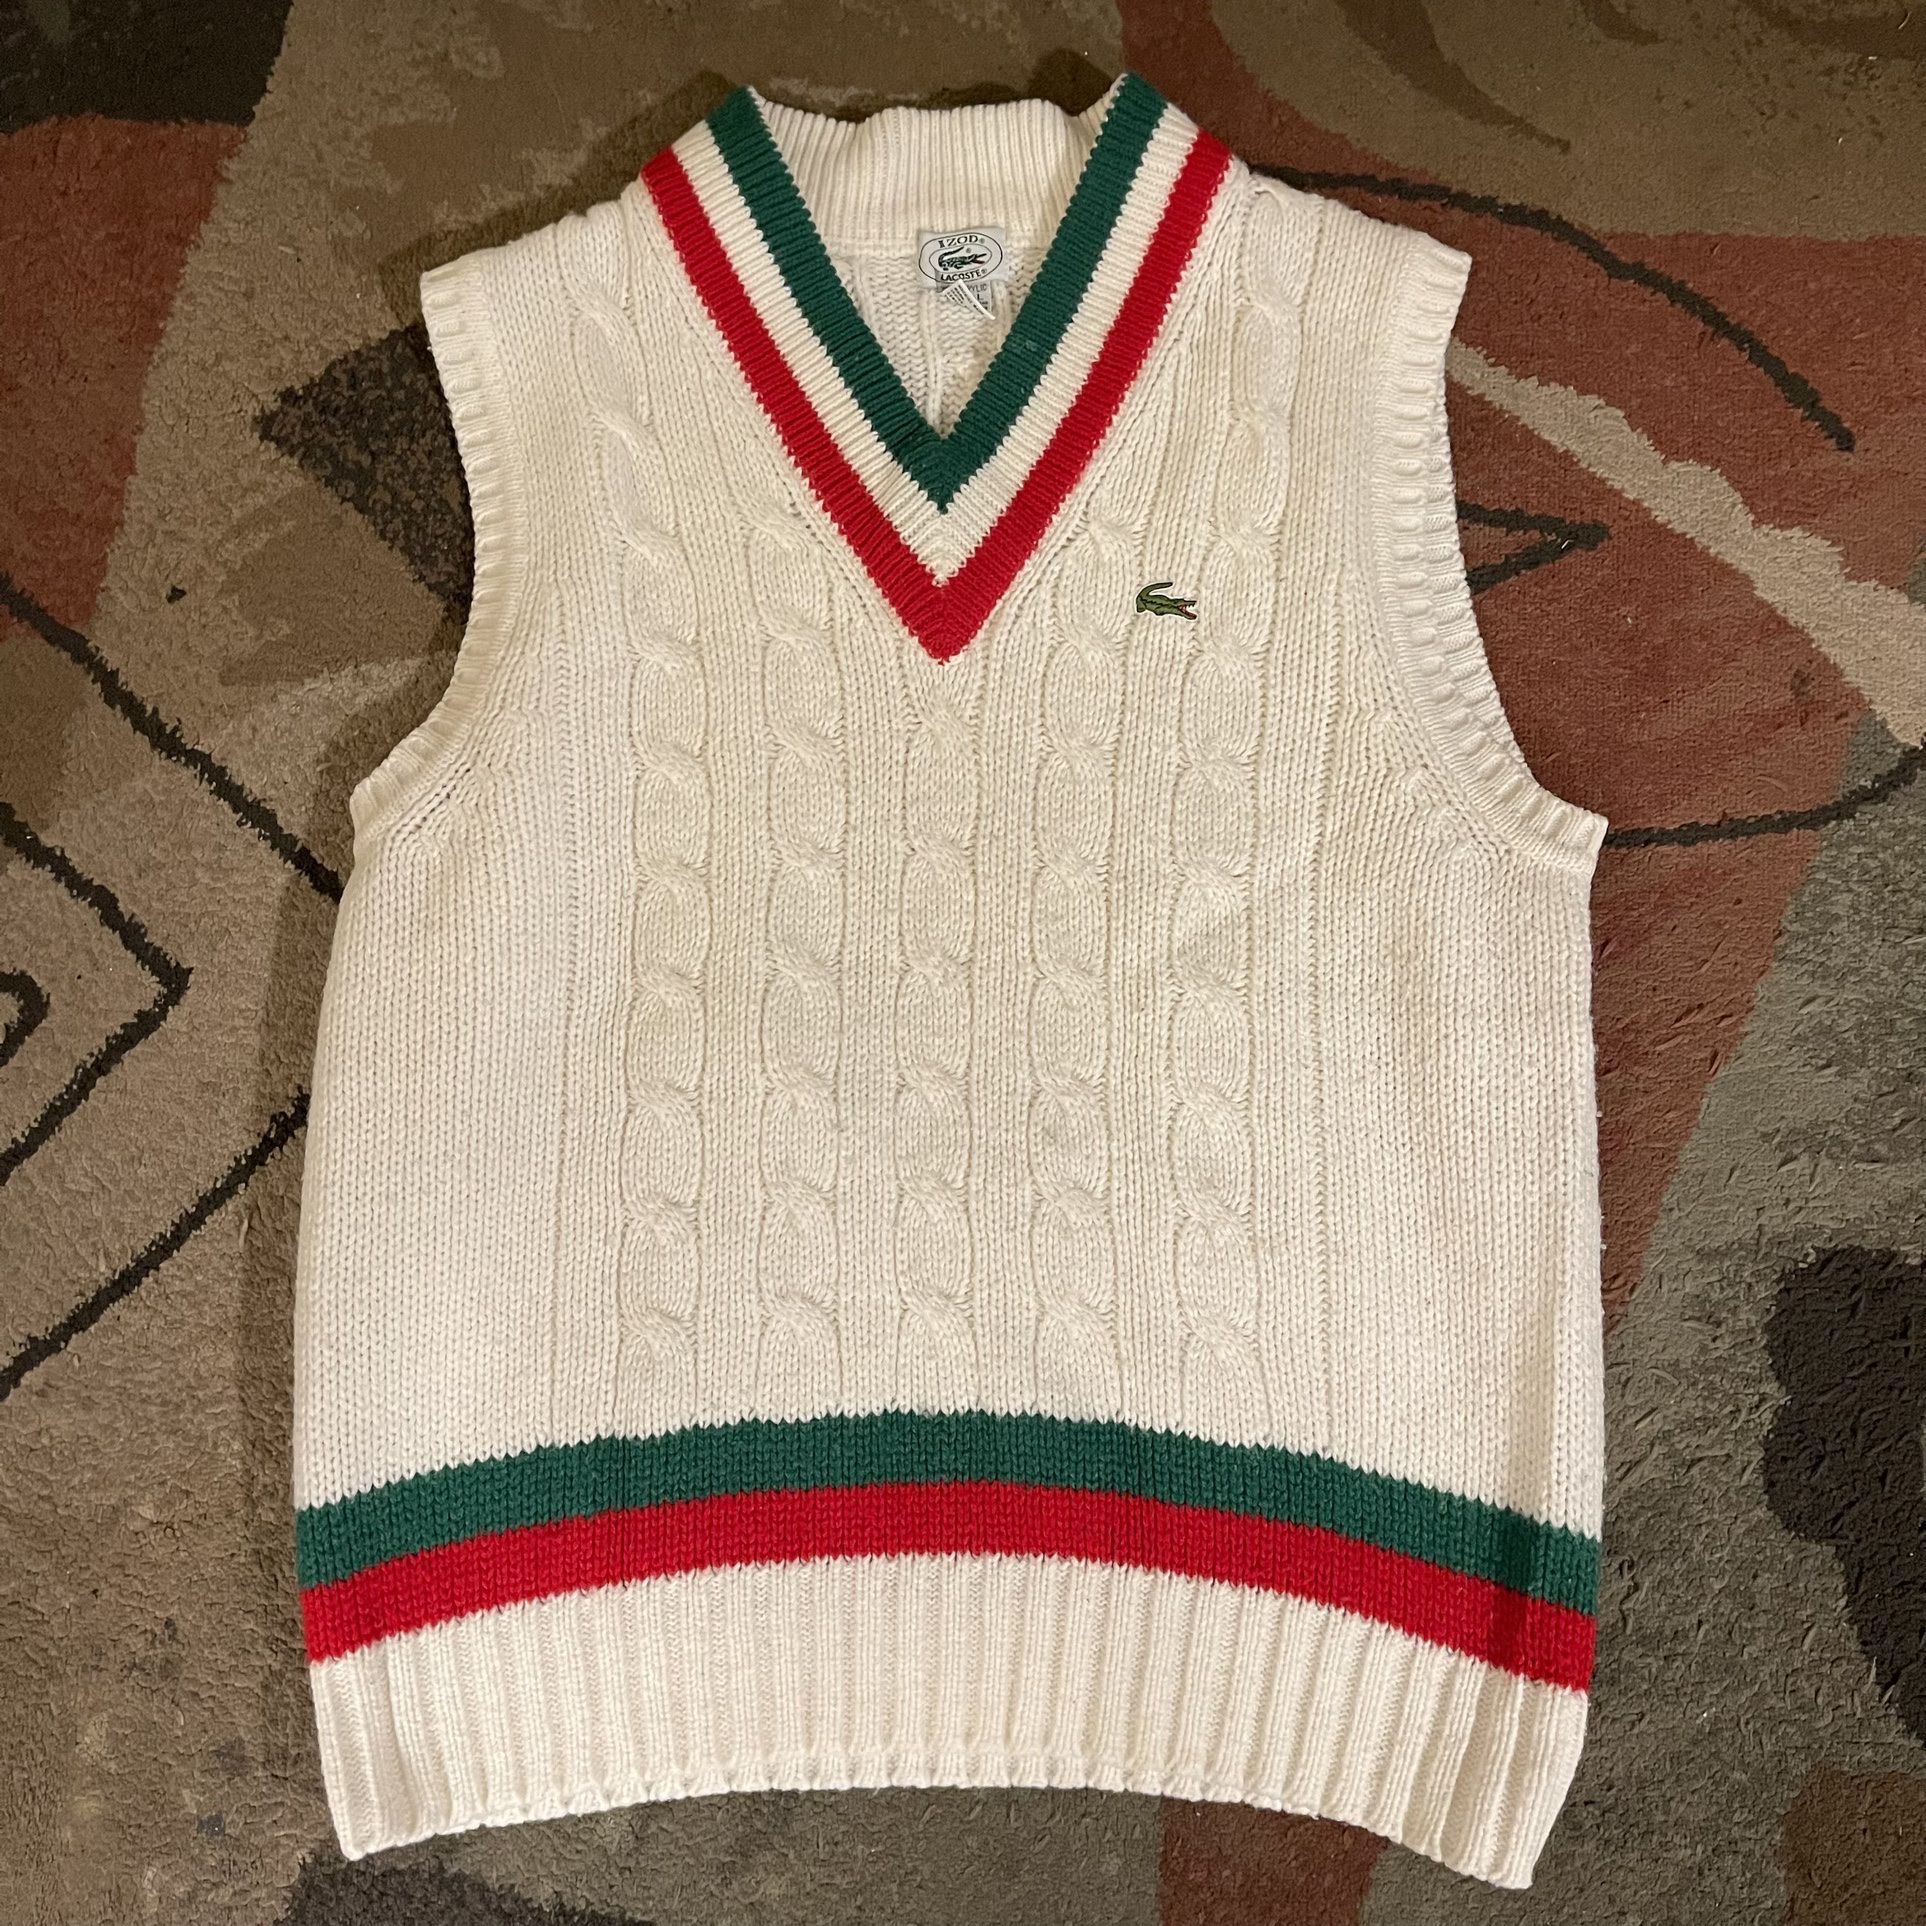 Vintage 1980s Lacoste Acrylic Knitted White Green Red Vest Size L for in Los Angeles, CA - OfferUp